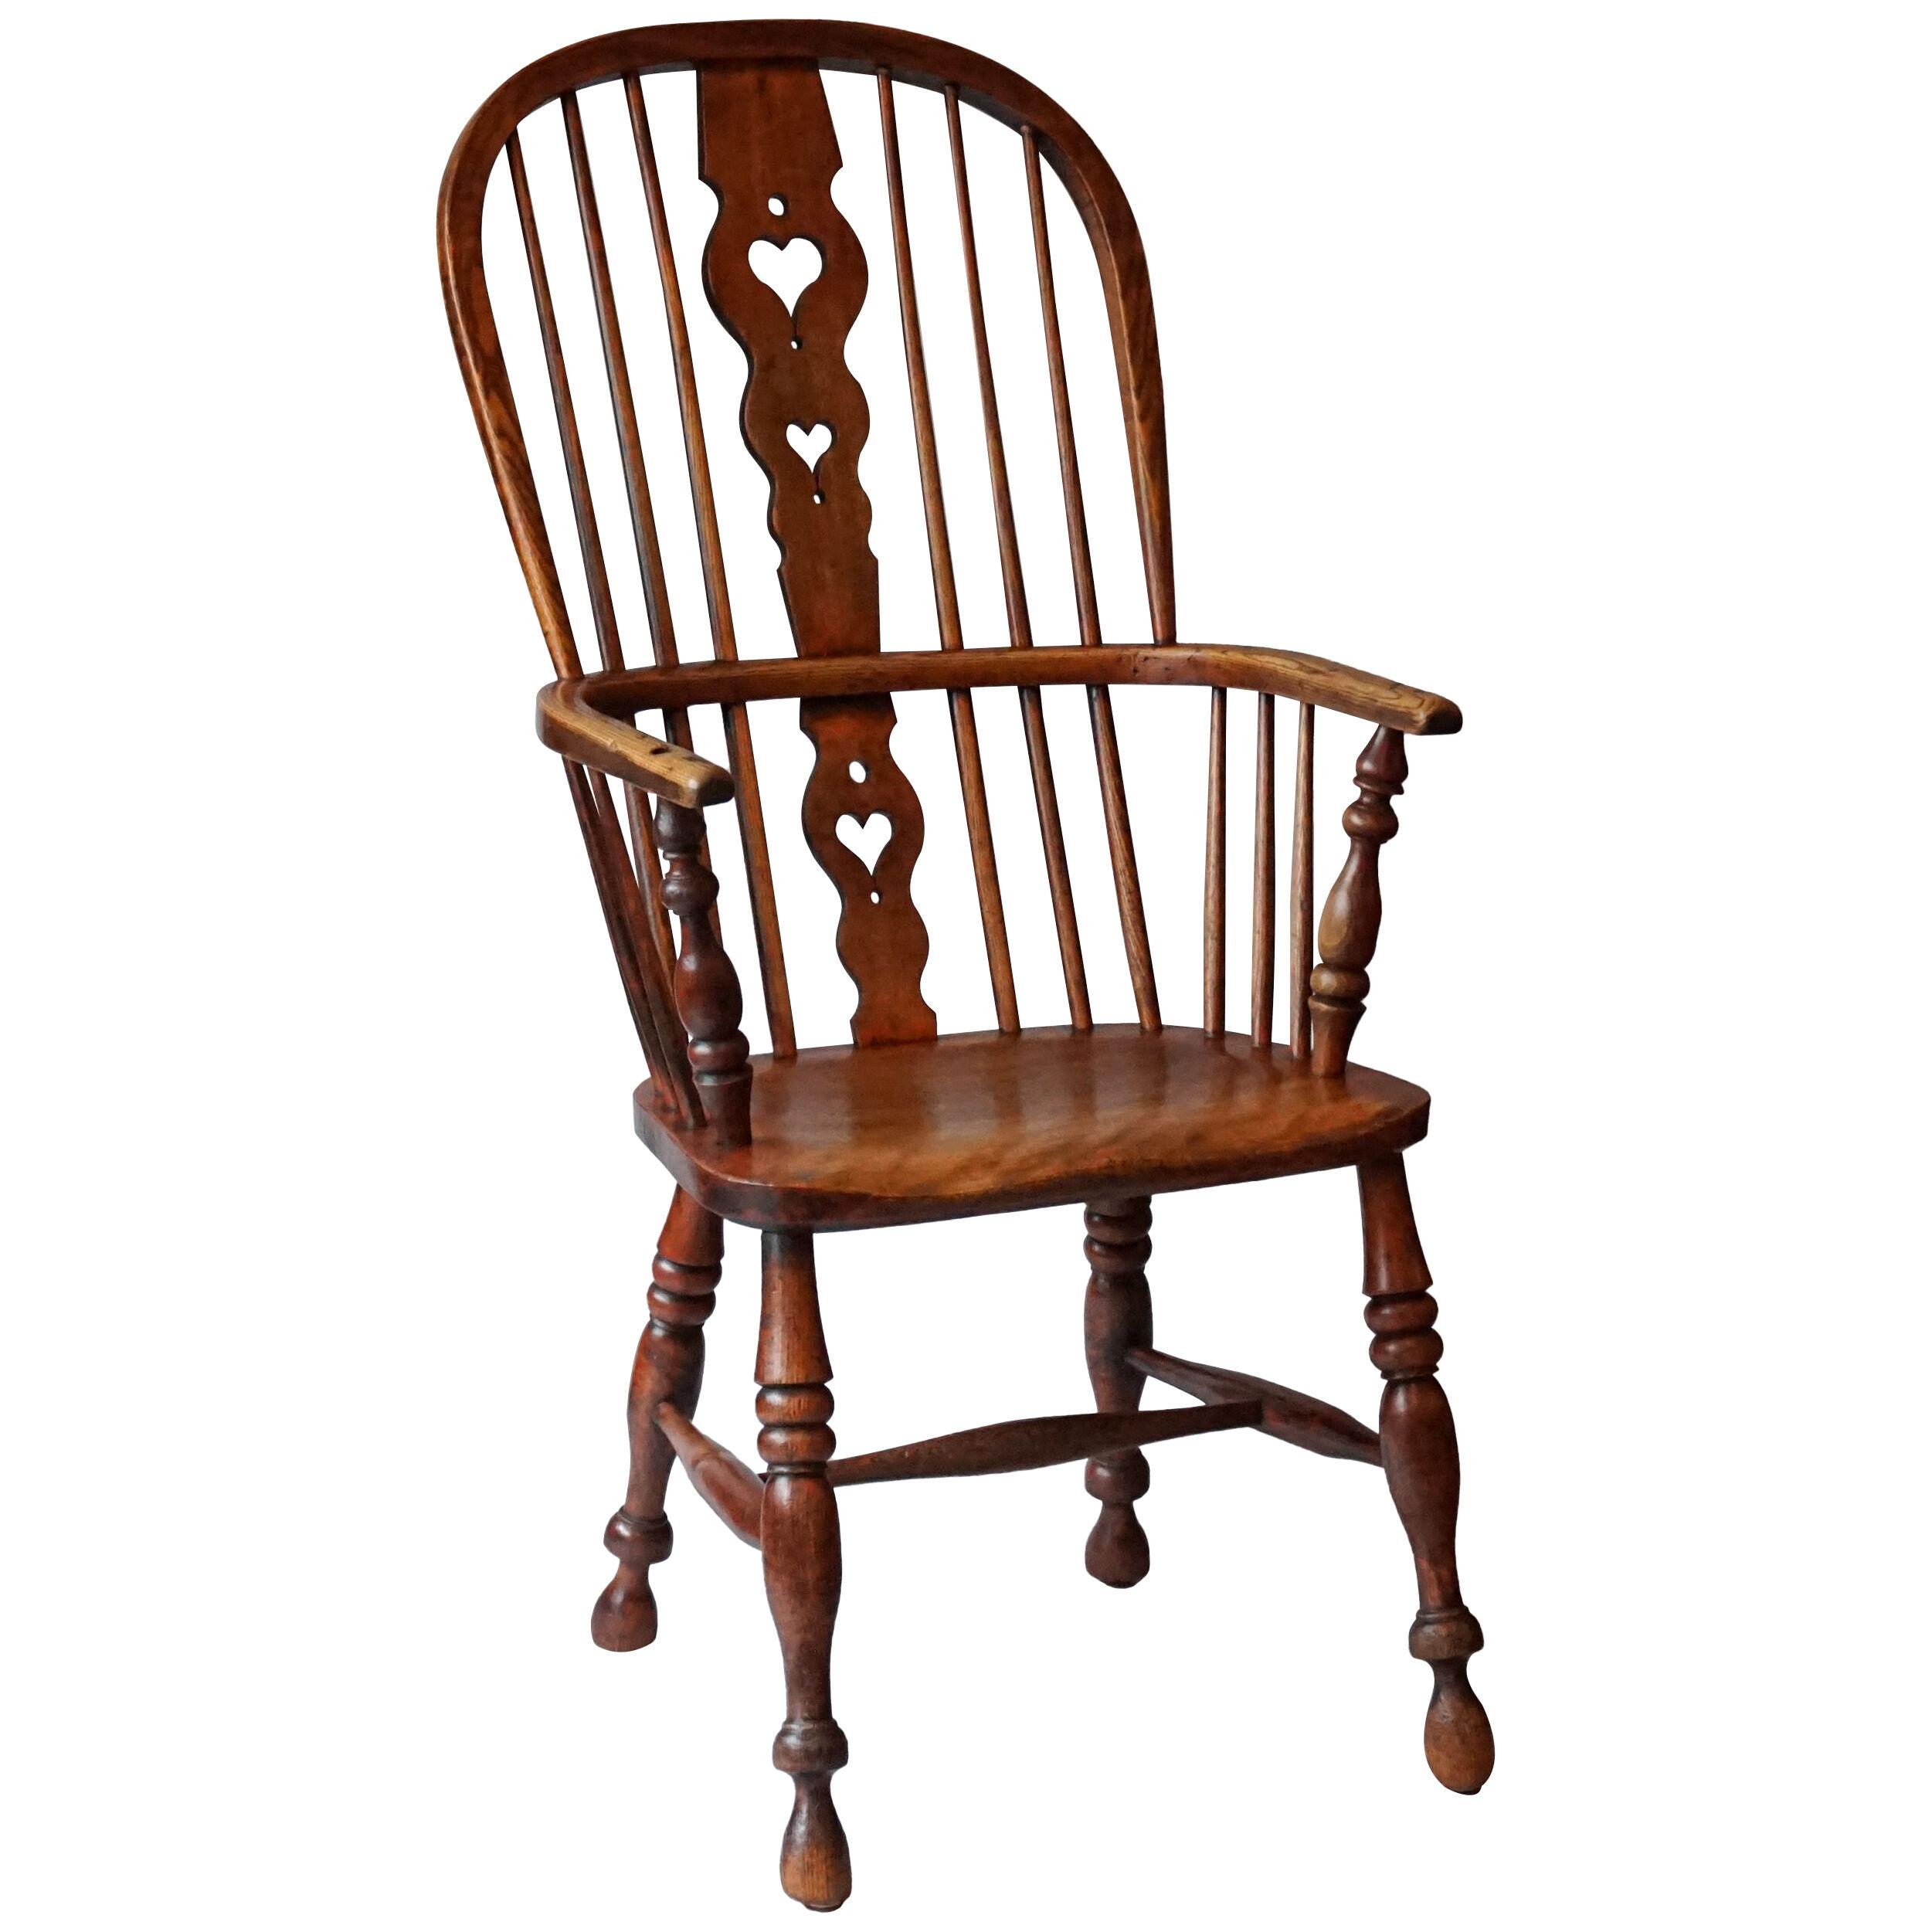 19th Century Georgian Comb Hoop Back Windsor Elm and Yew Wood Chair with Hearts